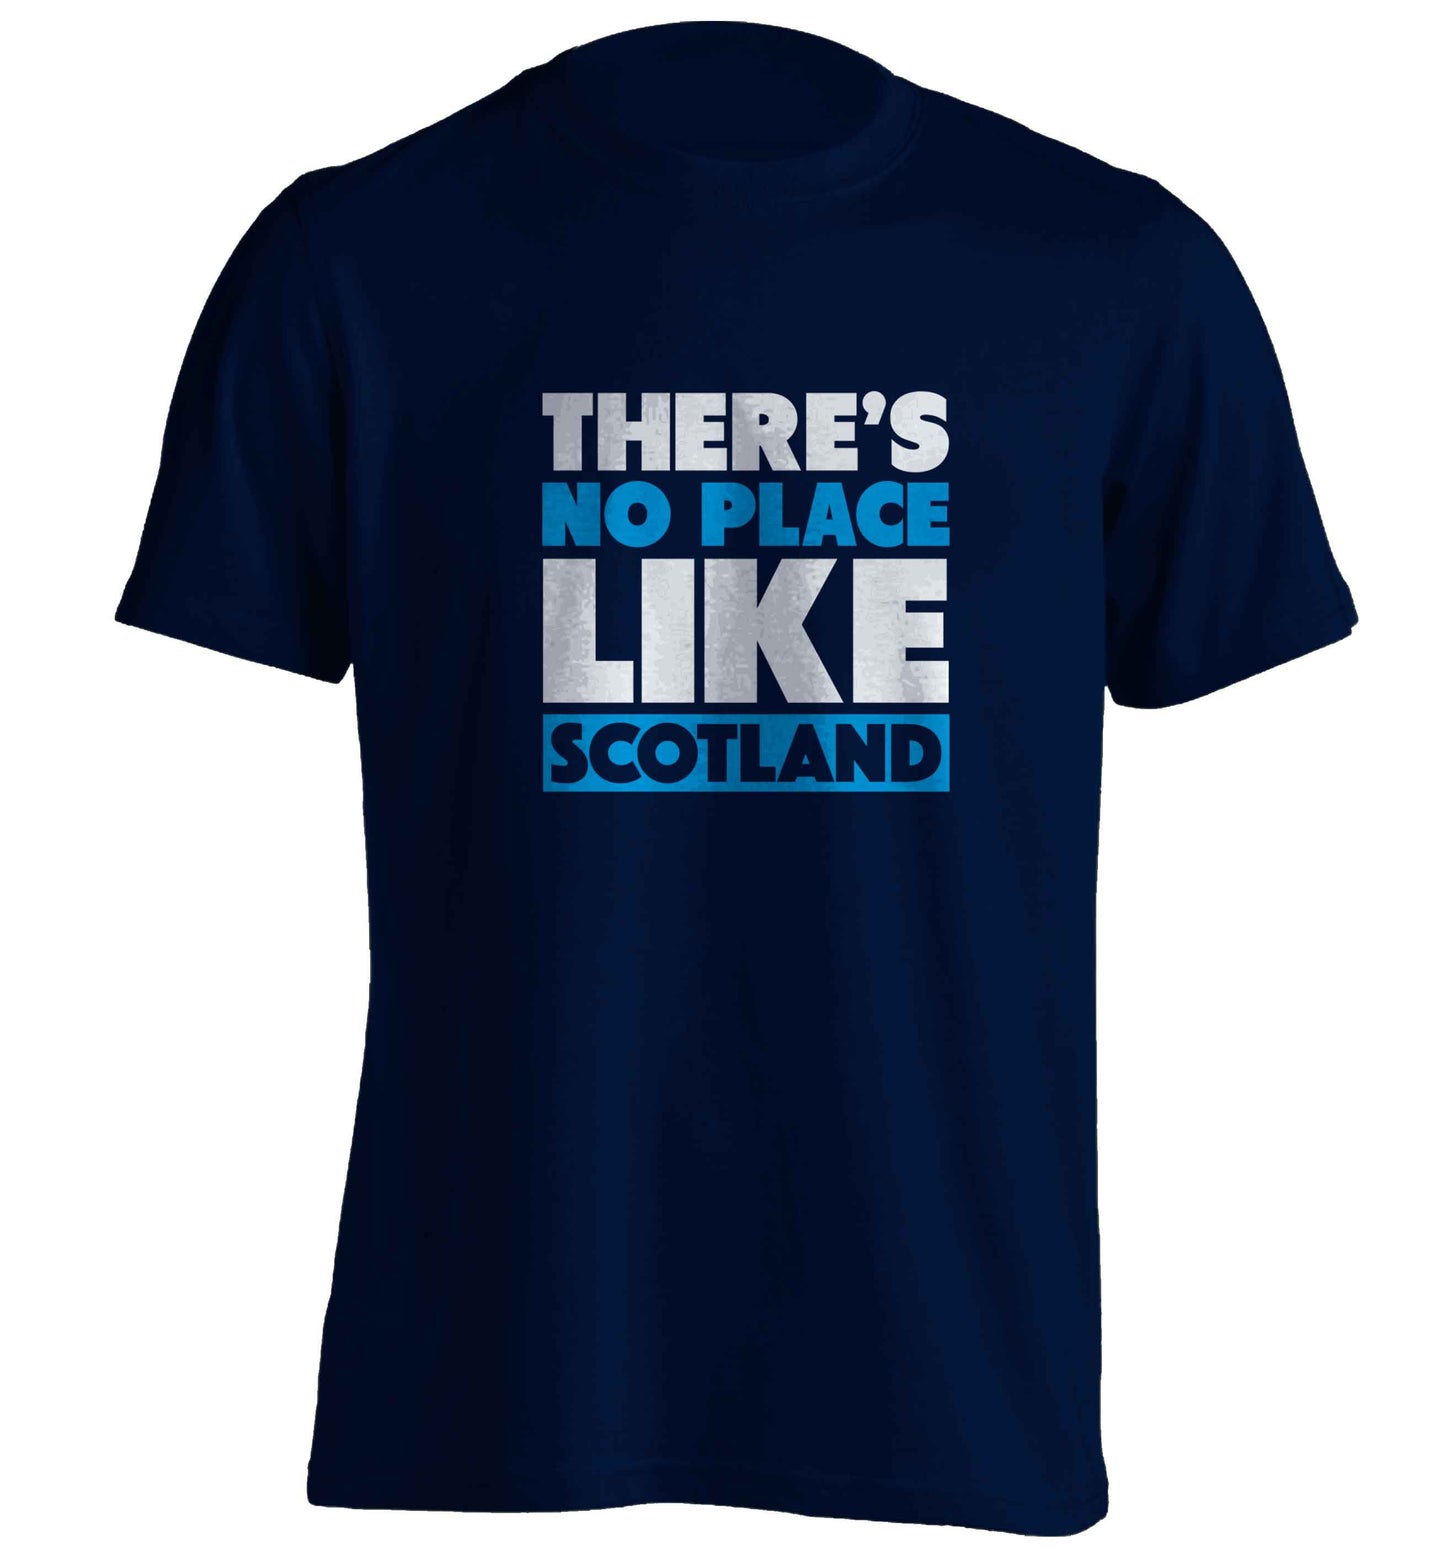 There's no place like Scotland adults unisex navy Tshirt 2XL